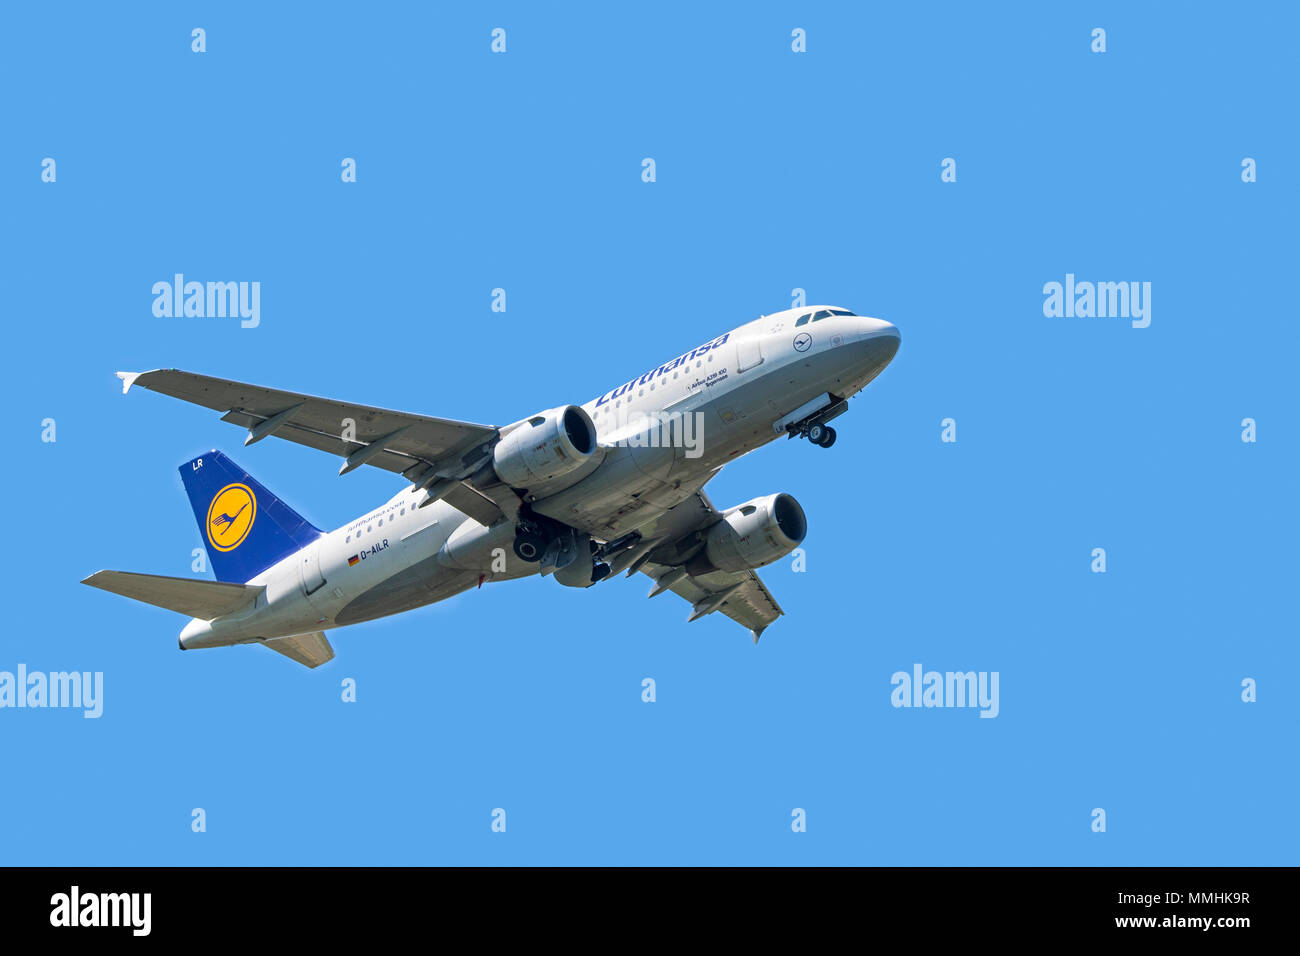 Airbus A319-100, narrow-body, commercial passenger twin-engine jet airliner from Lufthansa German Airlines in flight against blue sky Stock Photo